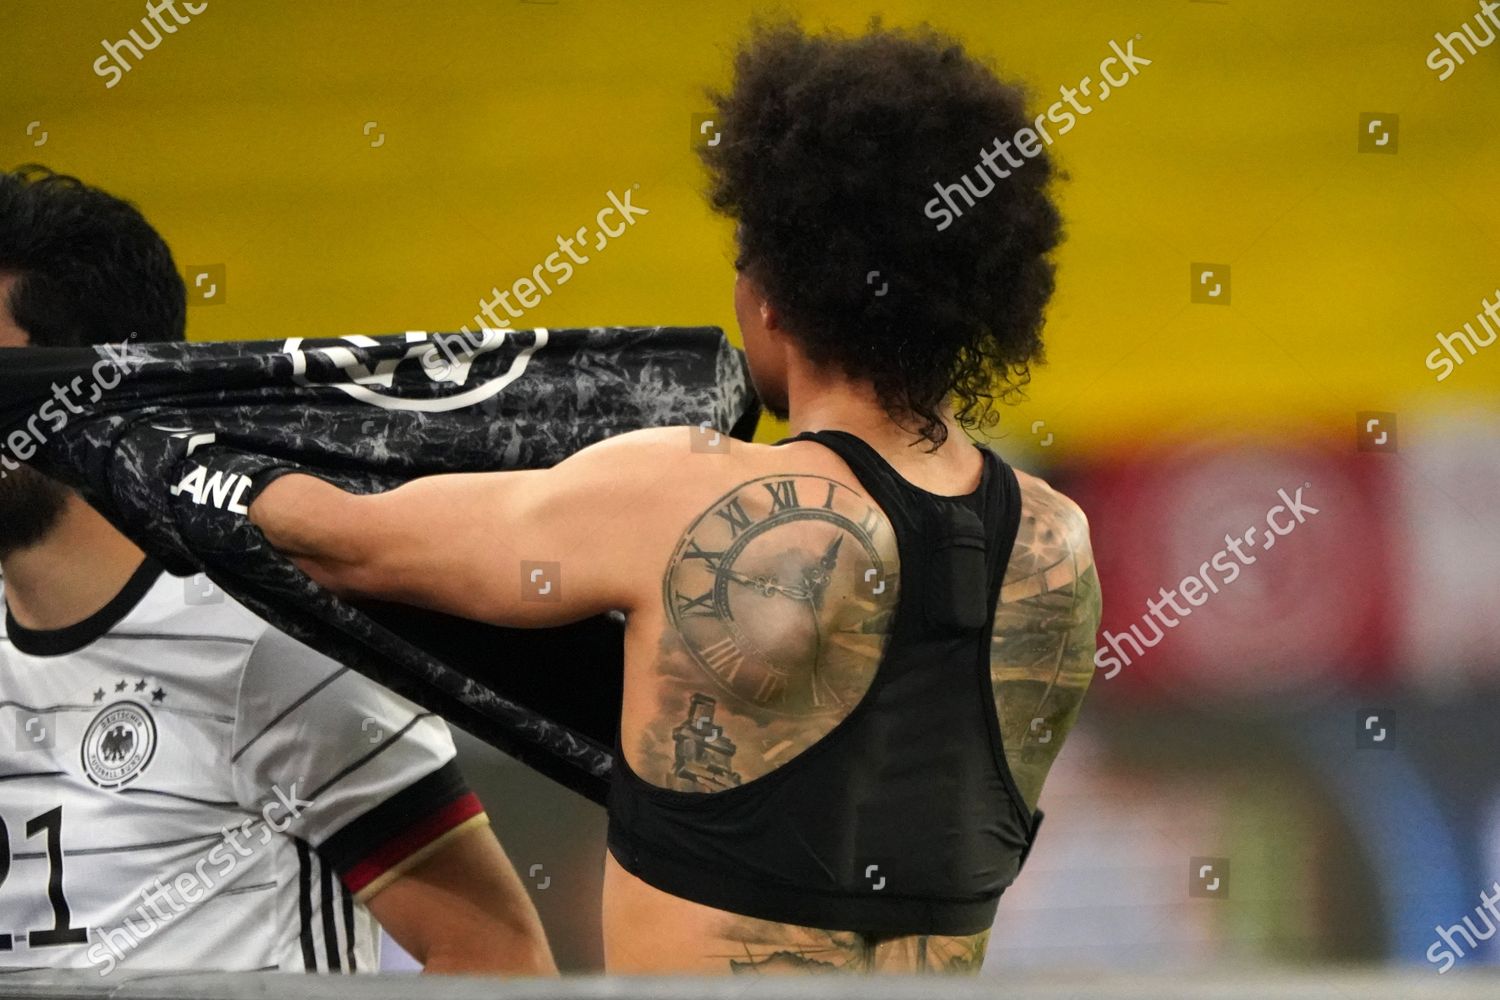 Shteef M on Twitter Leroy Sanes back tattoo of Leroy Sane would have  been a lot cooler if it wasnt on Leroy Sane httpstcoCOvY7H9Qlf   Twitter